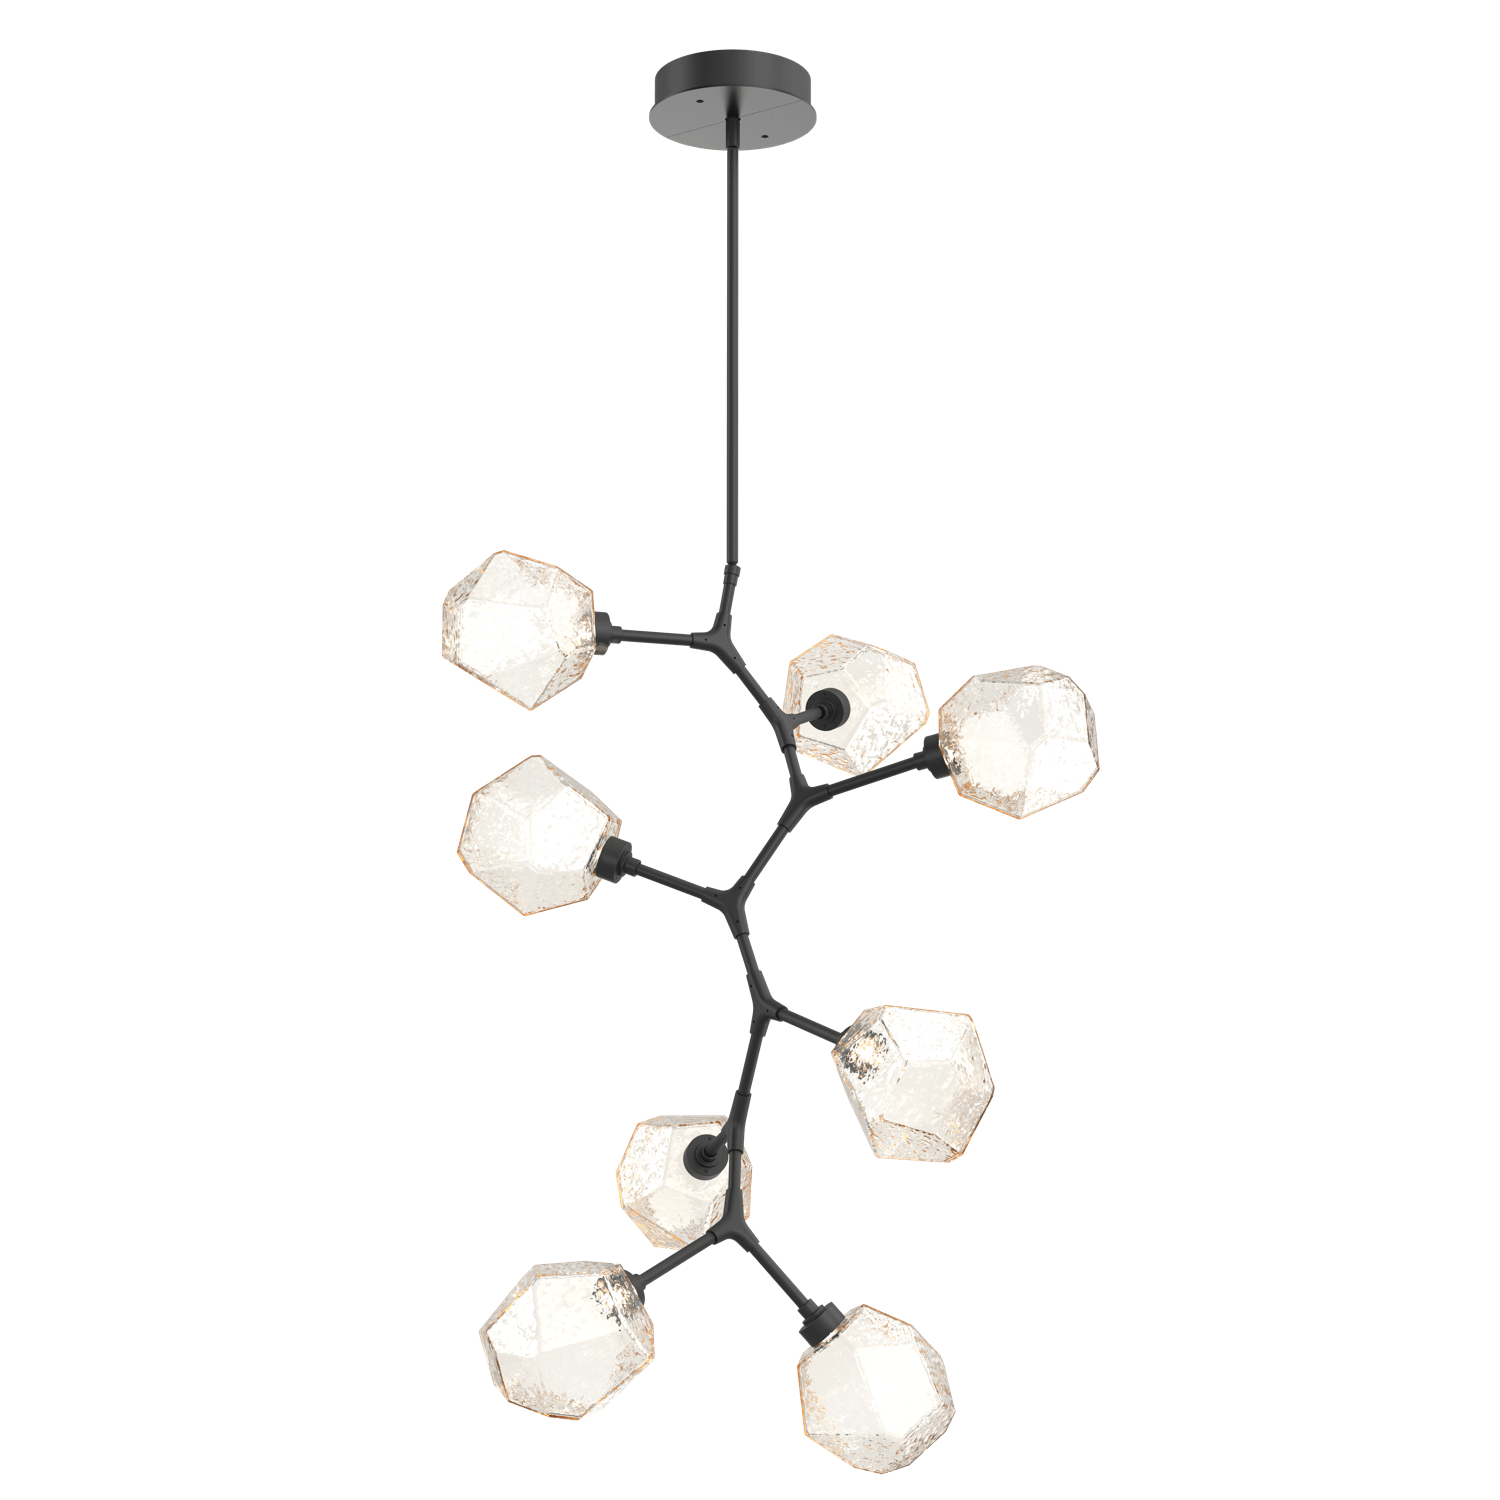 CHB0039-VB-MB-A-Hammerton-Studio-Gem-8-light-modern-vine-chandelier-with-matte-black-finish-and-amber-blown-glass-shades-and-LED-lamping